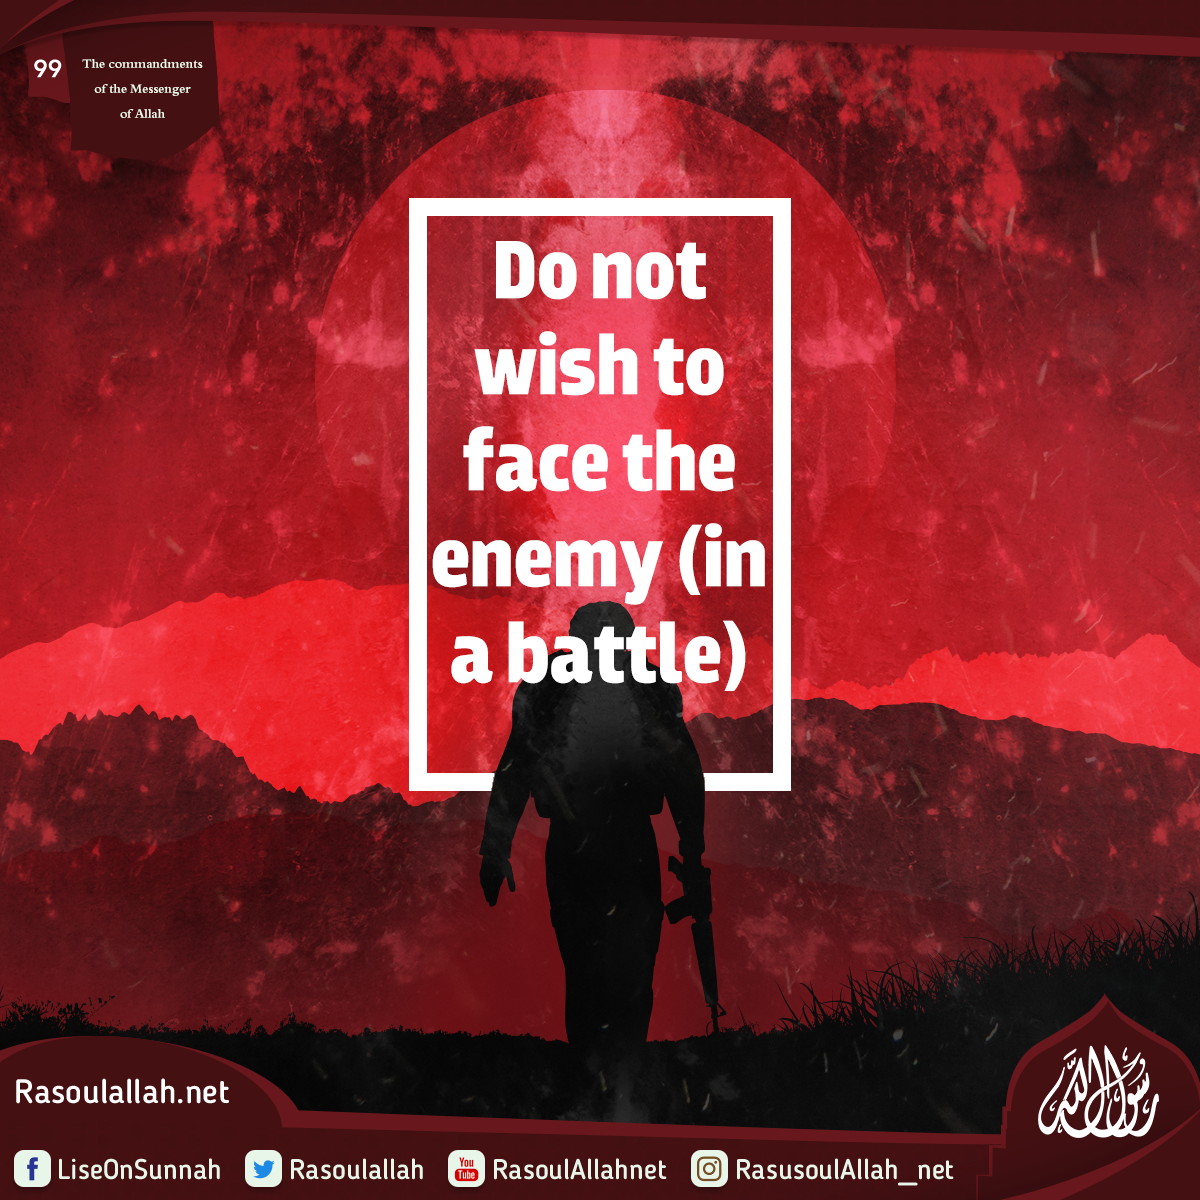 Do not wish to face the enemy (in a battle)